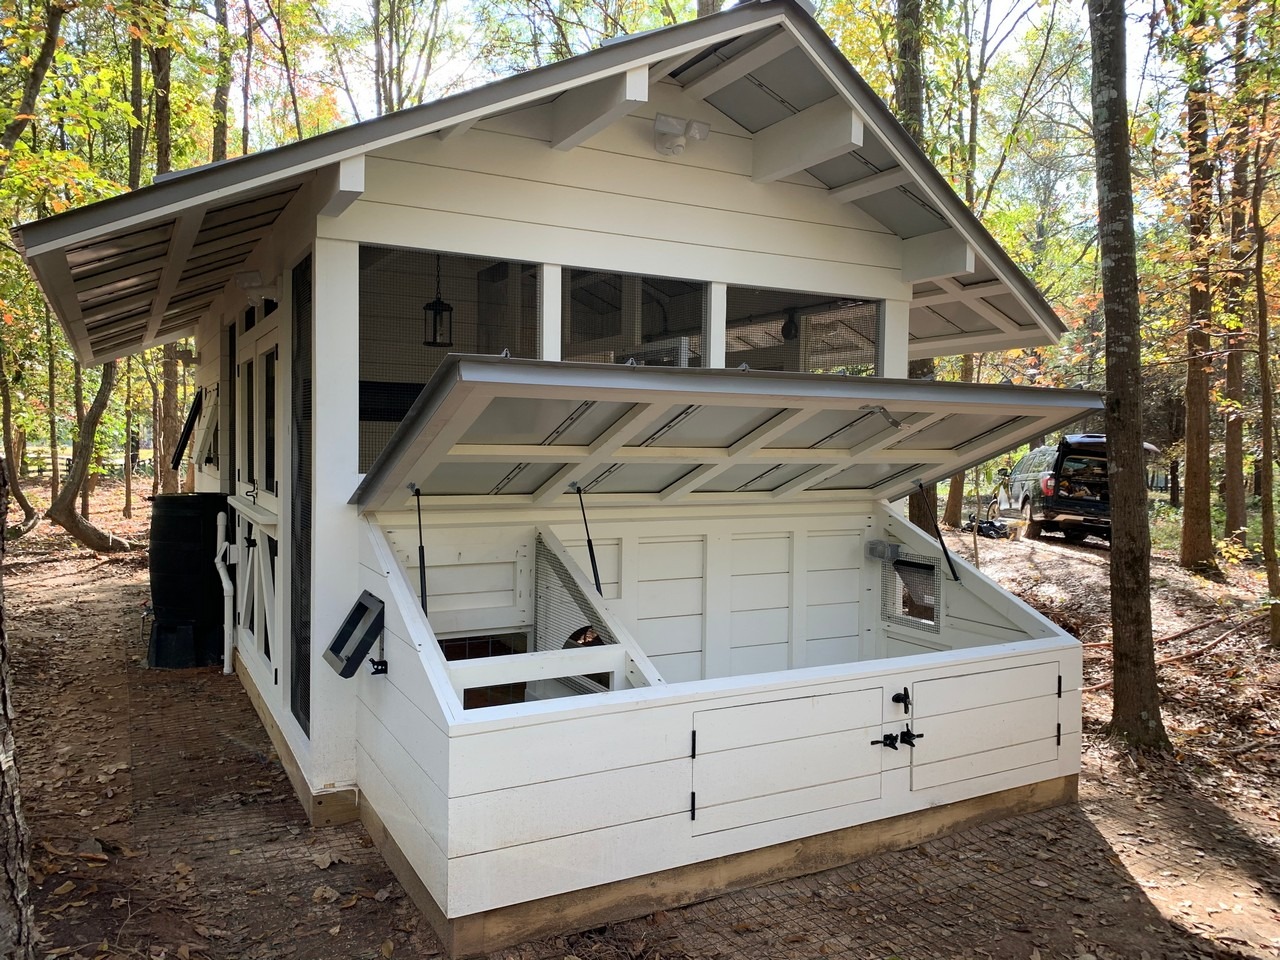 Modern farmhouse chicken and duck coop has a duck dipper for ducks to get their heads wet